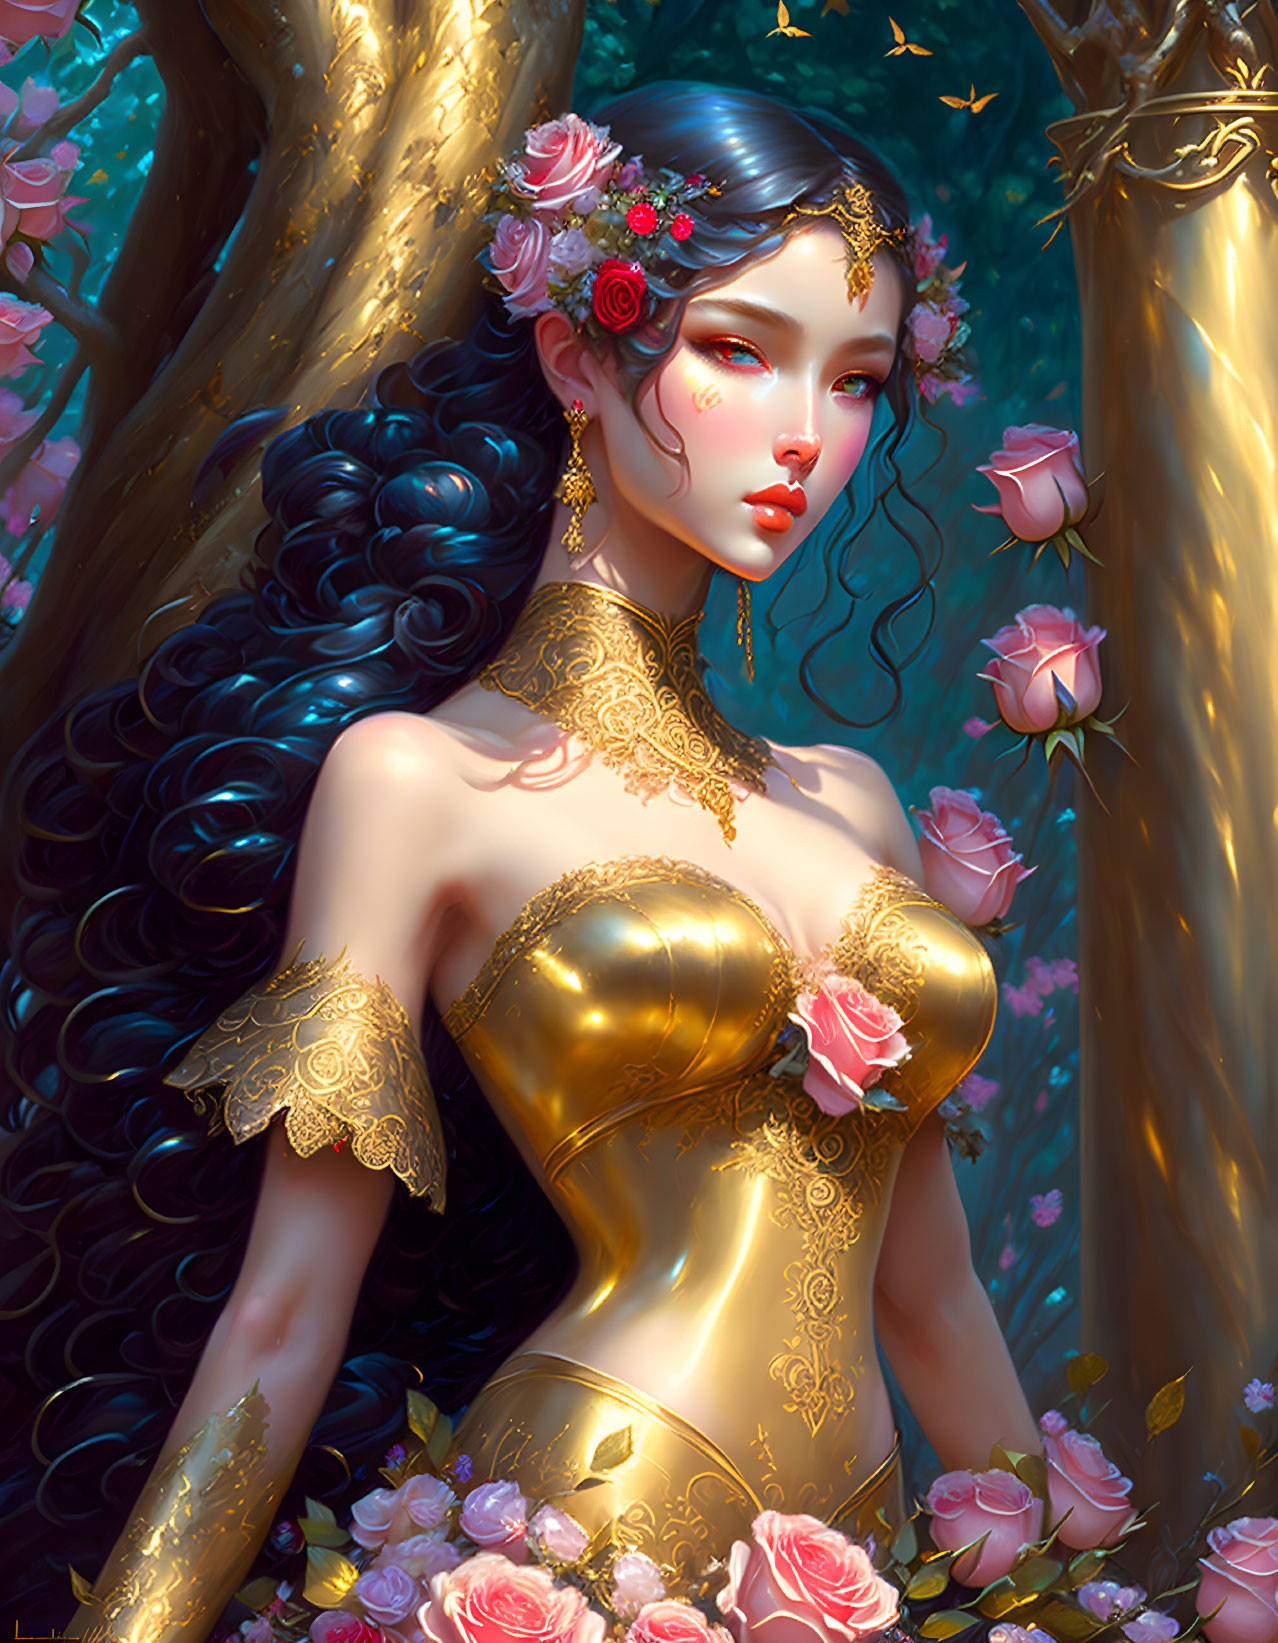 Digital illustration of woman with black hair, pink flowers, gold ornaments, golden bodice, in enchanted